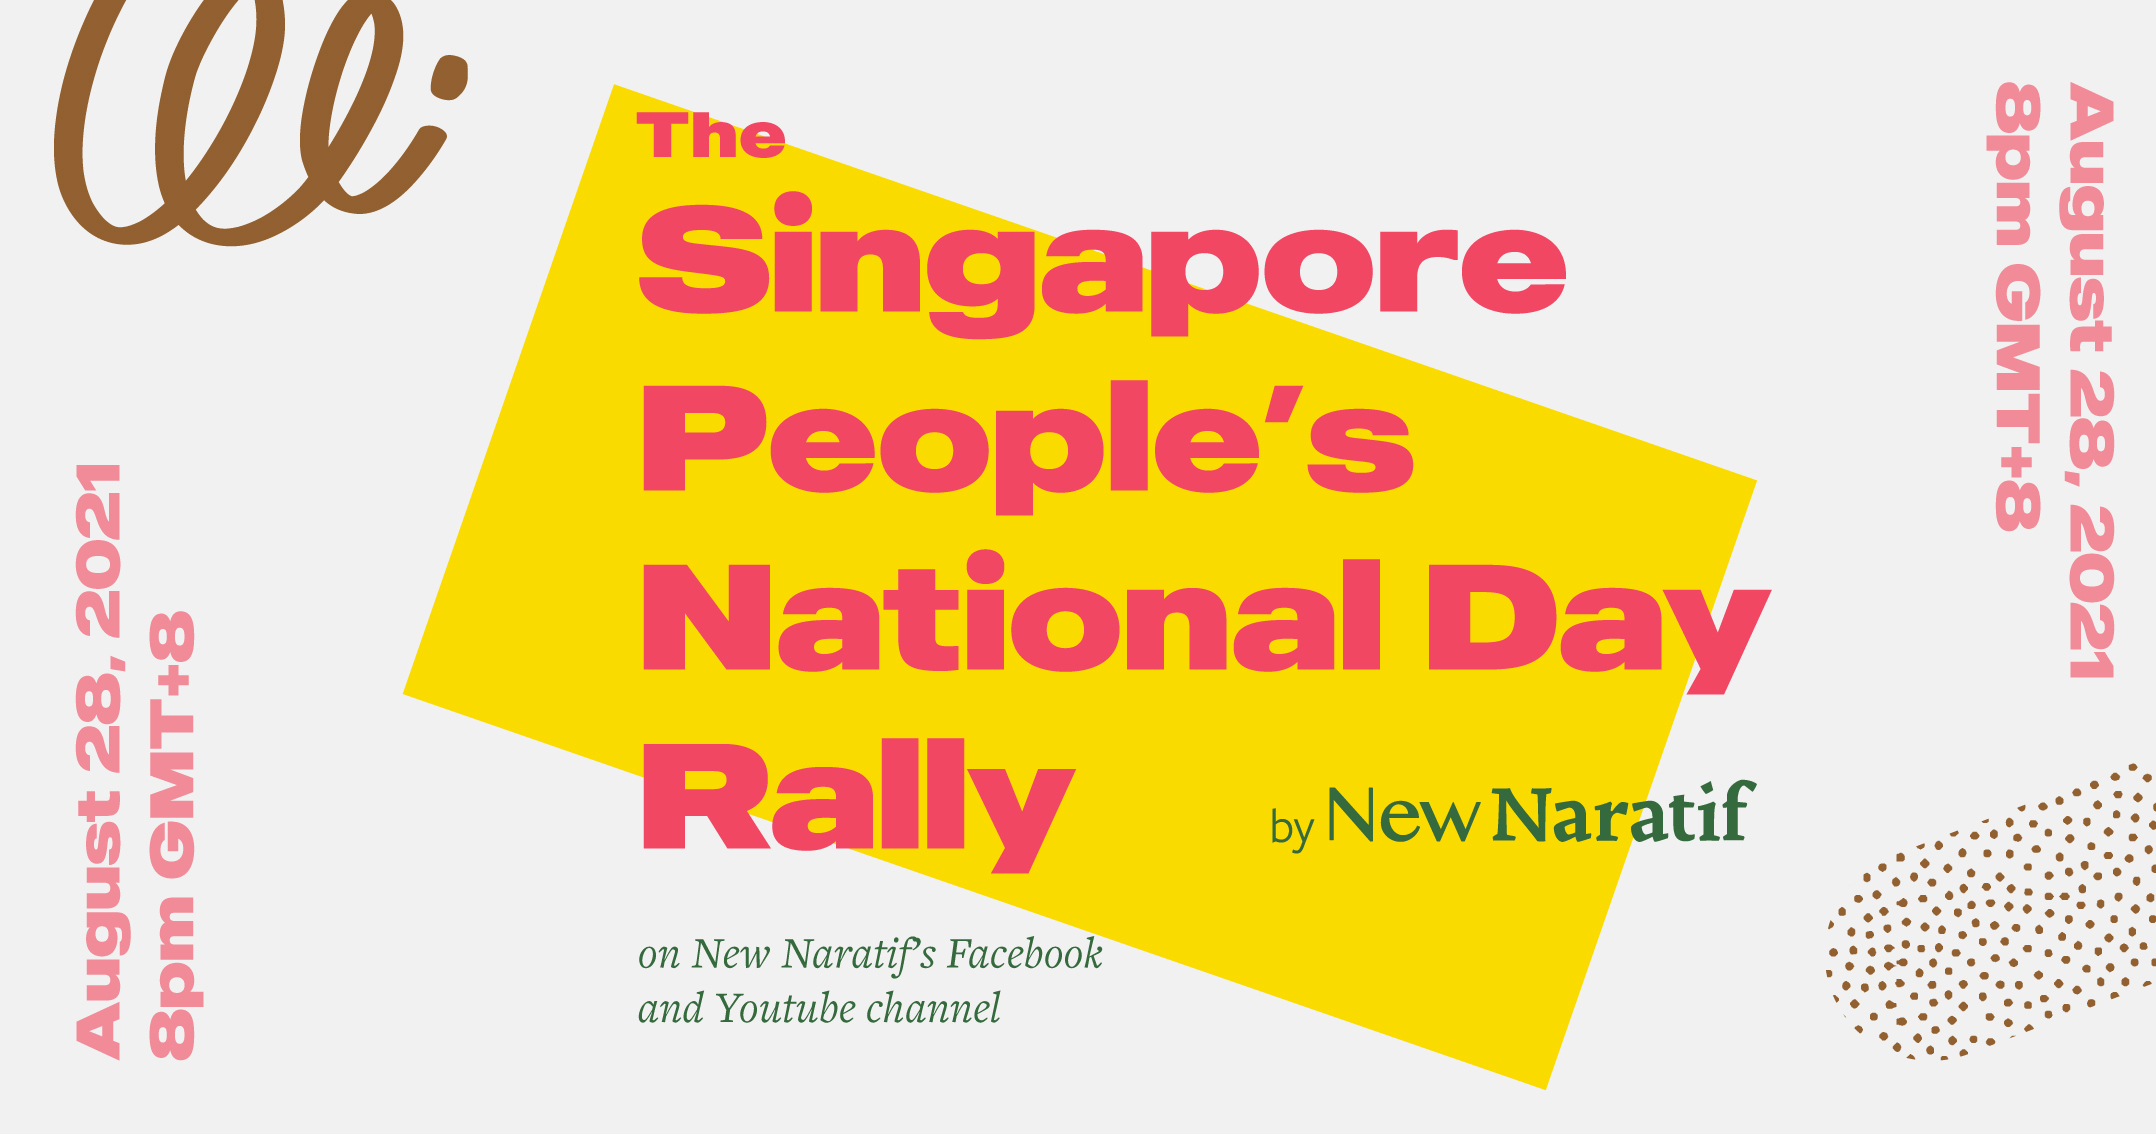 The Singapore People's National Day Rally by New Naratif on New Naratif's Facebook and YouTube channel. Saturday 28 August at 8PM GMT+8